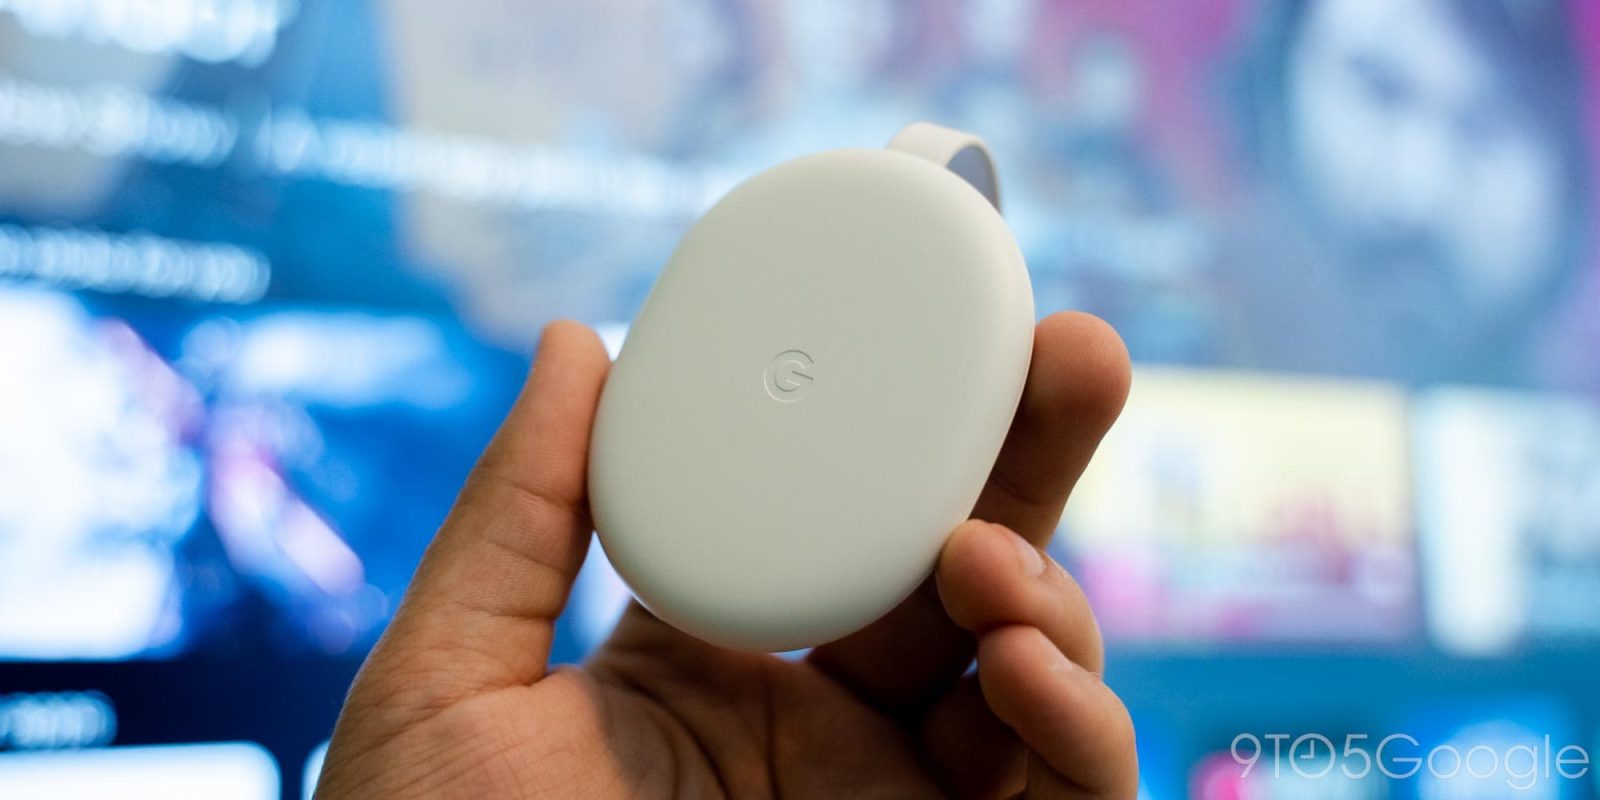 Google merges Chromecast and Android TV with the “Chromecast with